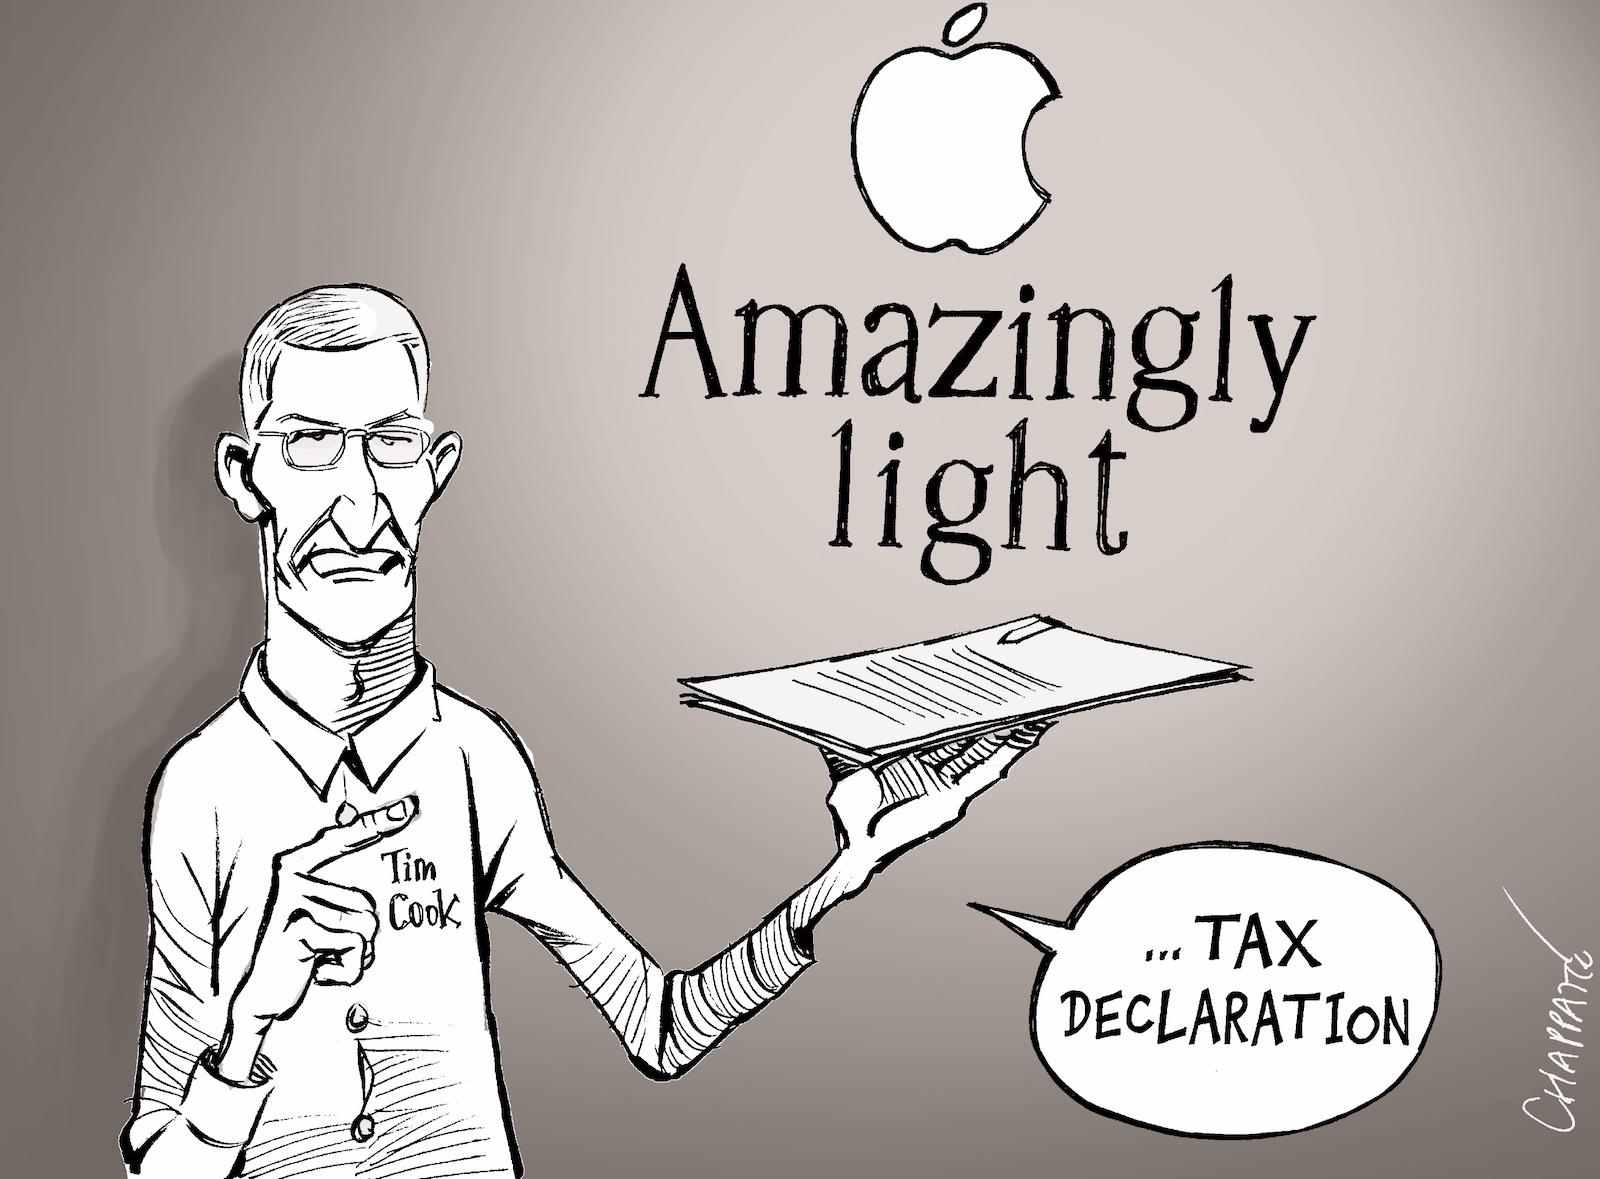 Apple,the most innovative company (tax-wise)